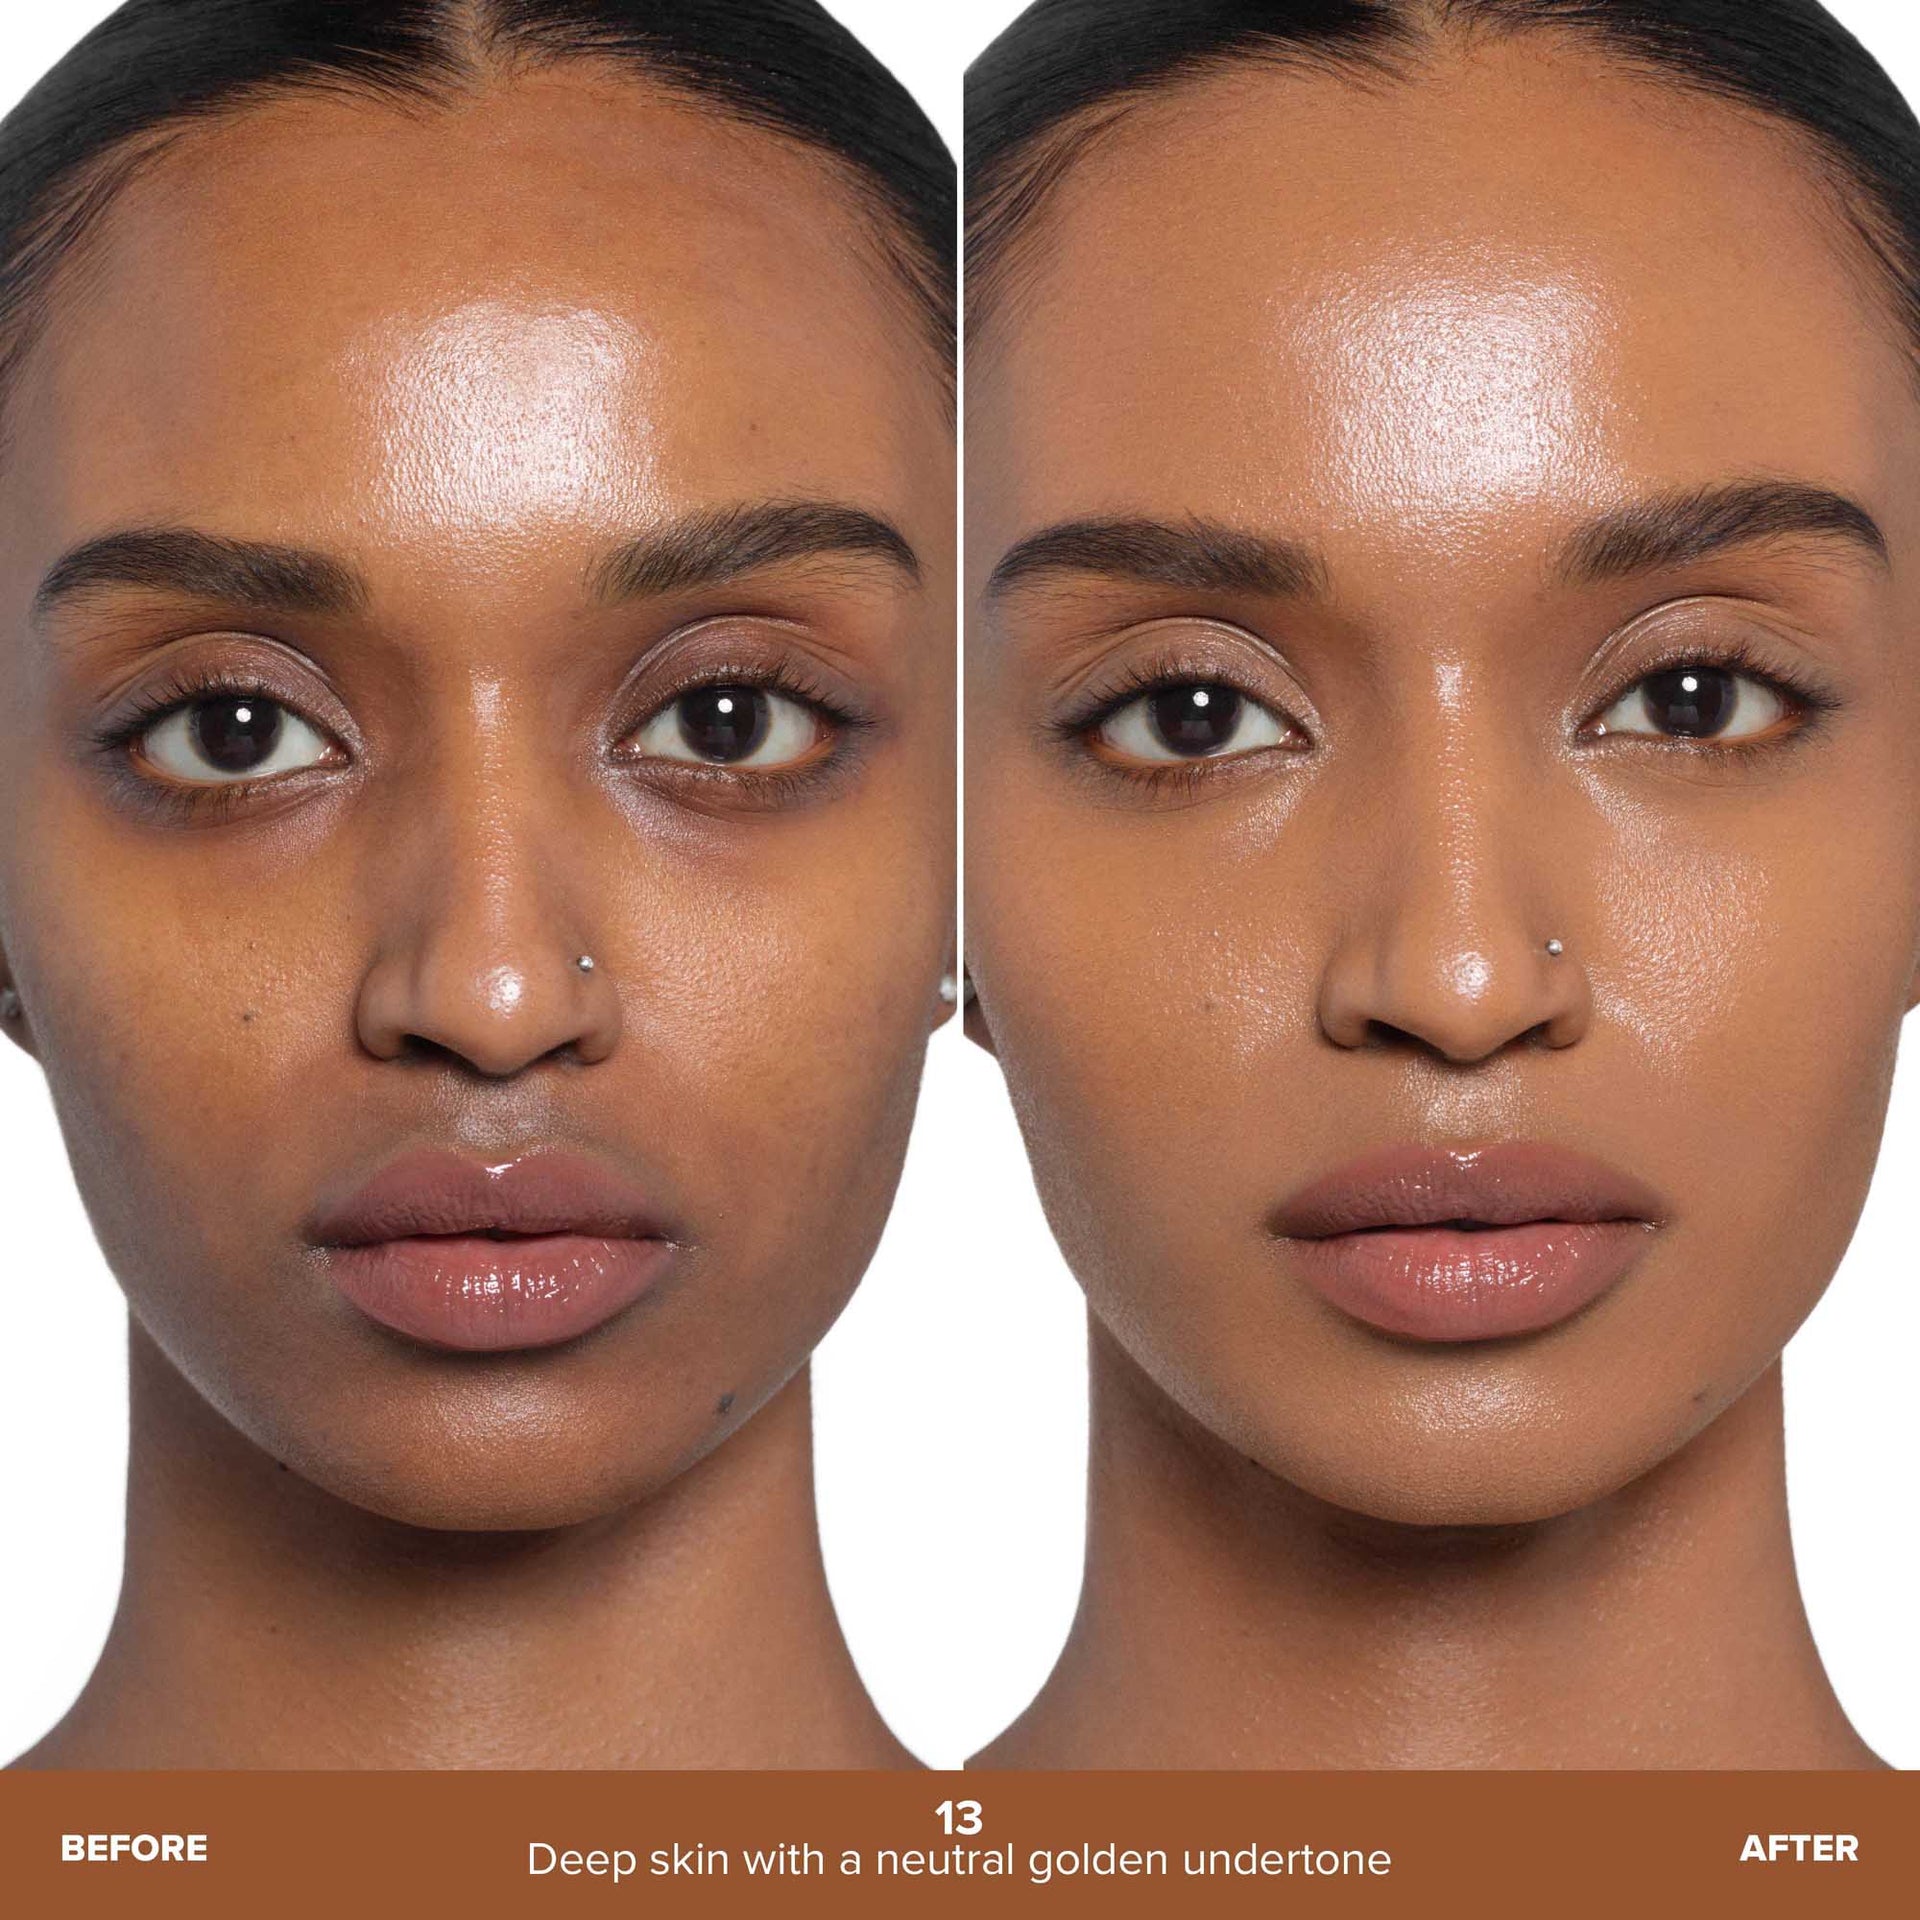 Shade 13 | Beauty Balm Serum Boosted Skin Tint Before & After - Shade 13